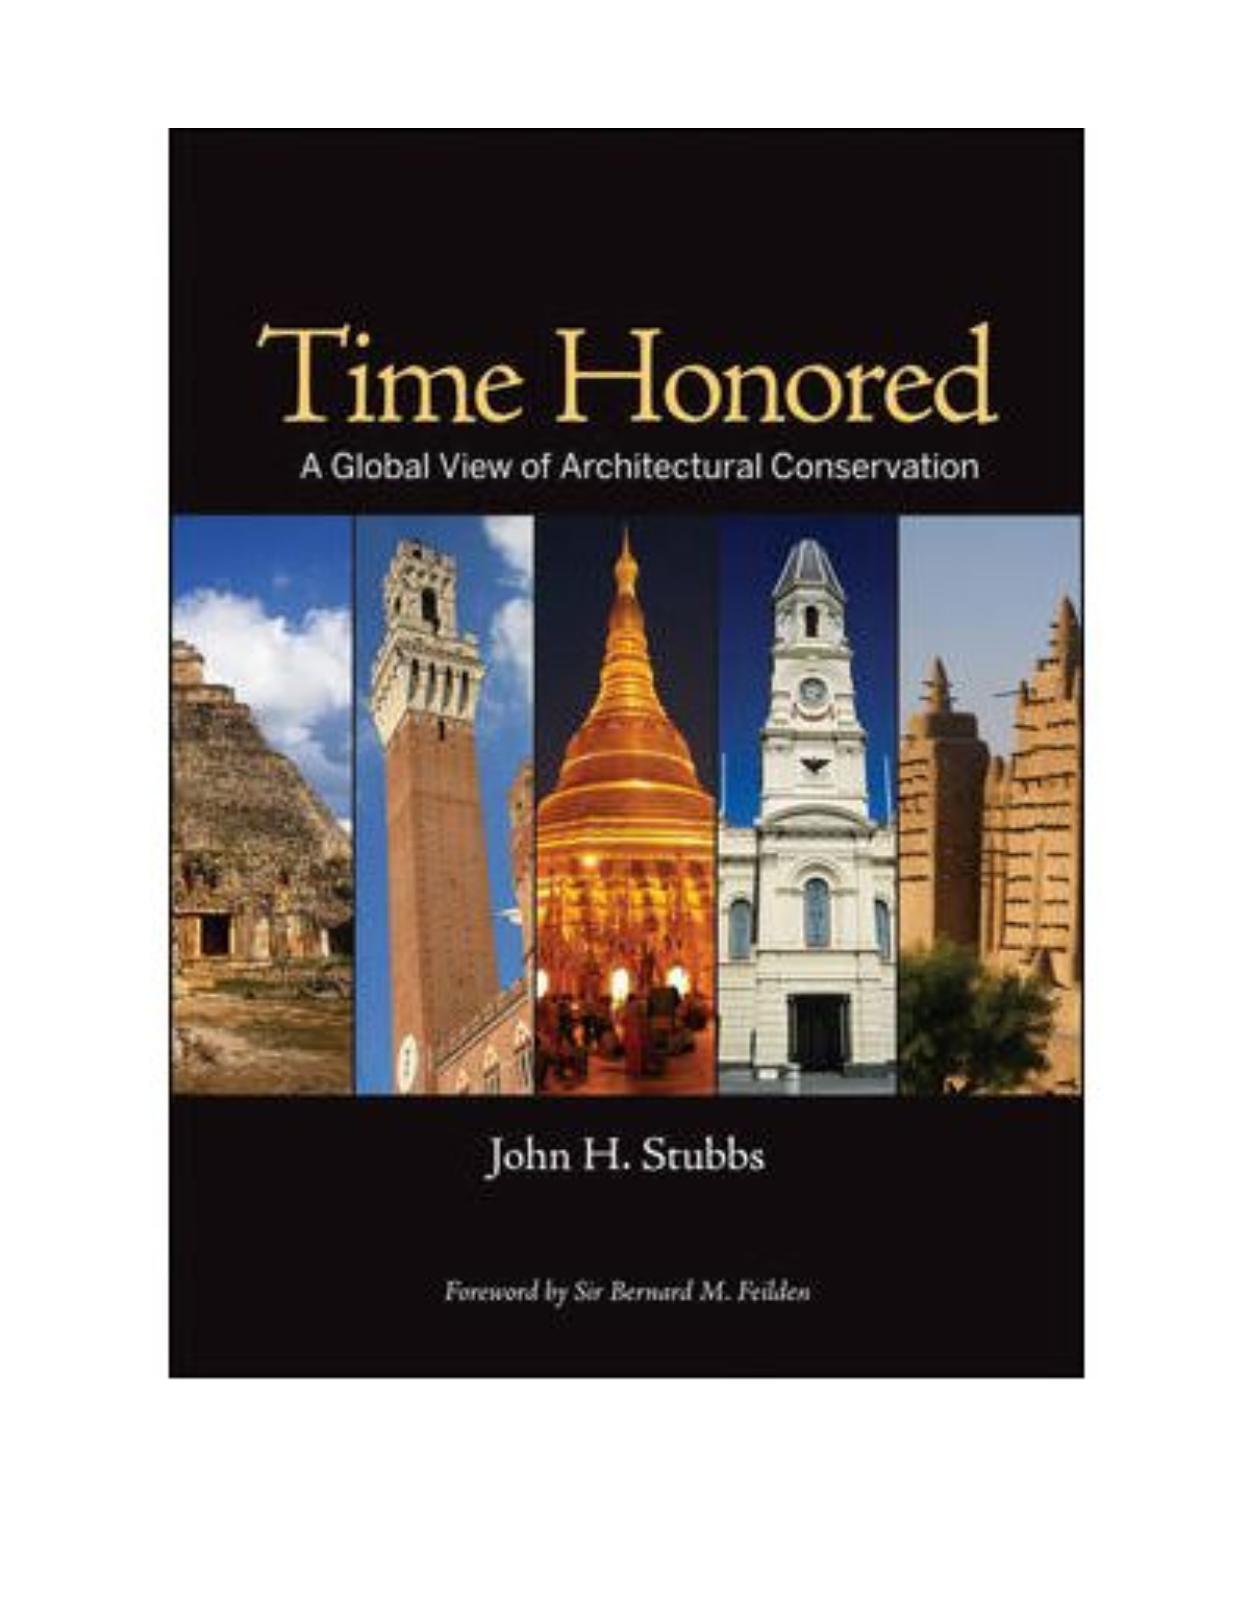 Time Honored: A Global View of Architectural Conservation